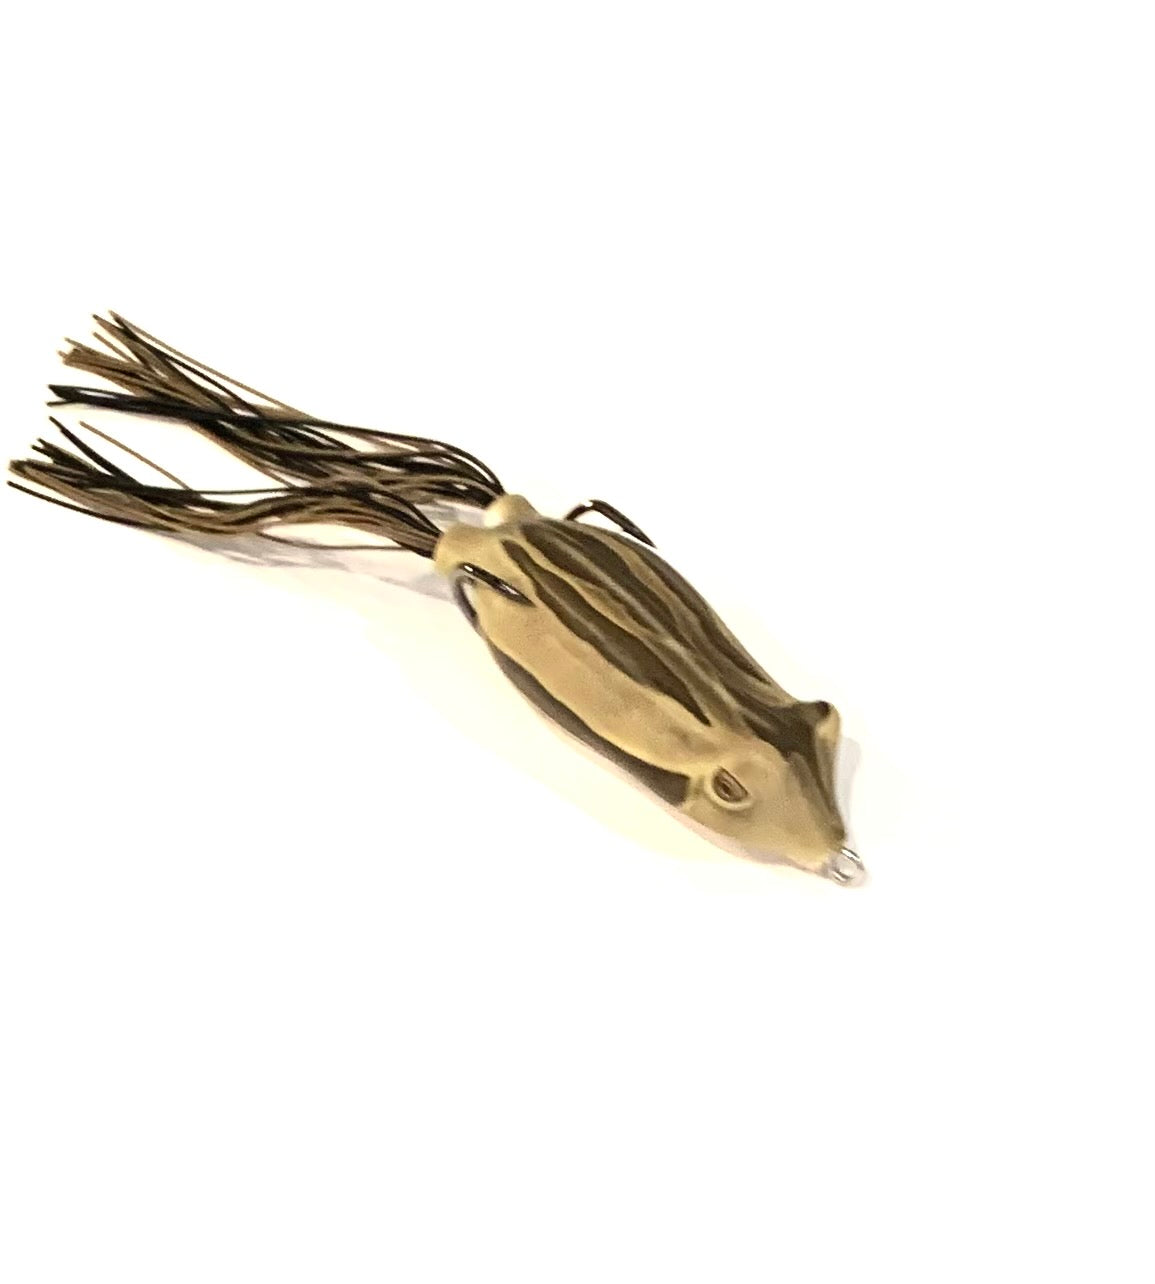 Snag Proof Pro Series Phat Frog – Coyote Bait & Tackle